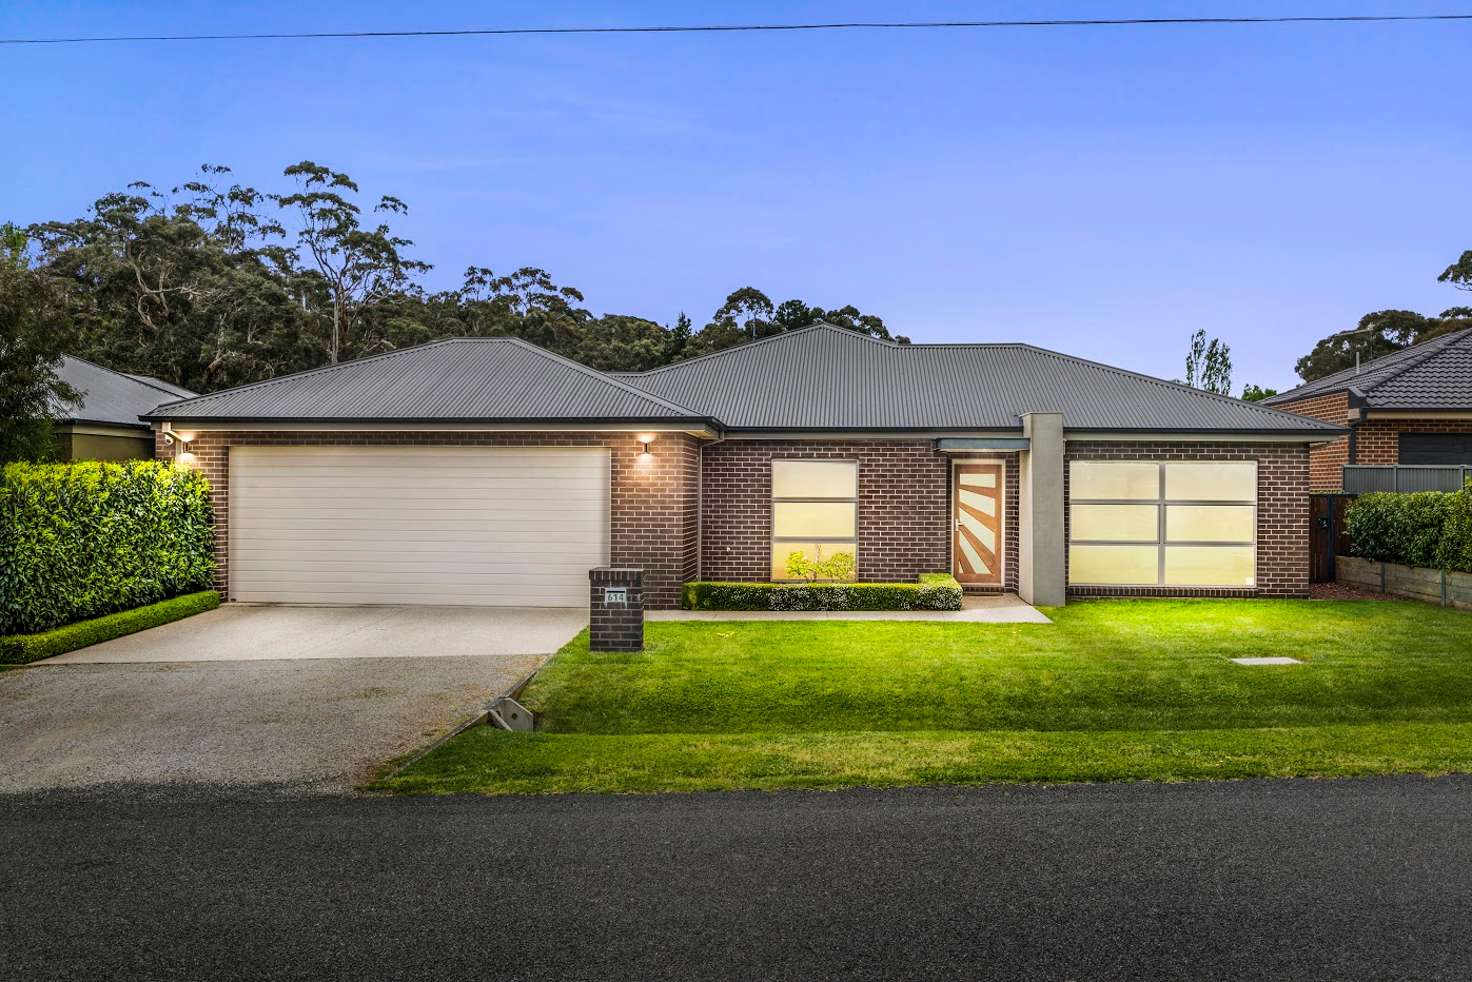 Main view of Homely house listing, 614 Somerville Street, Buninyong VIC 3357